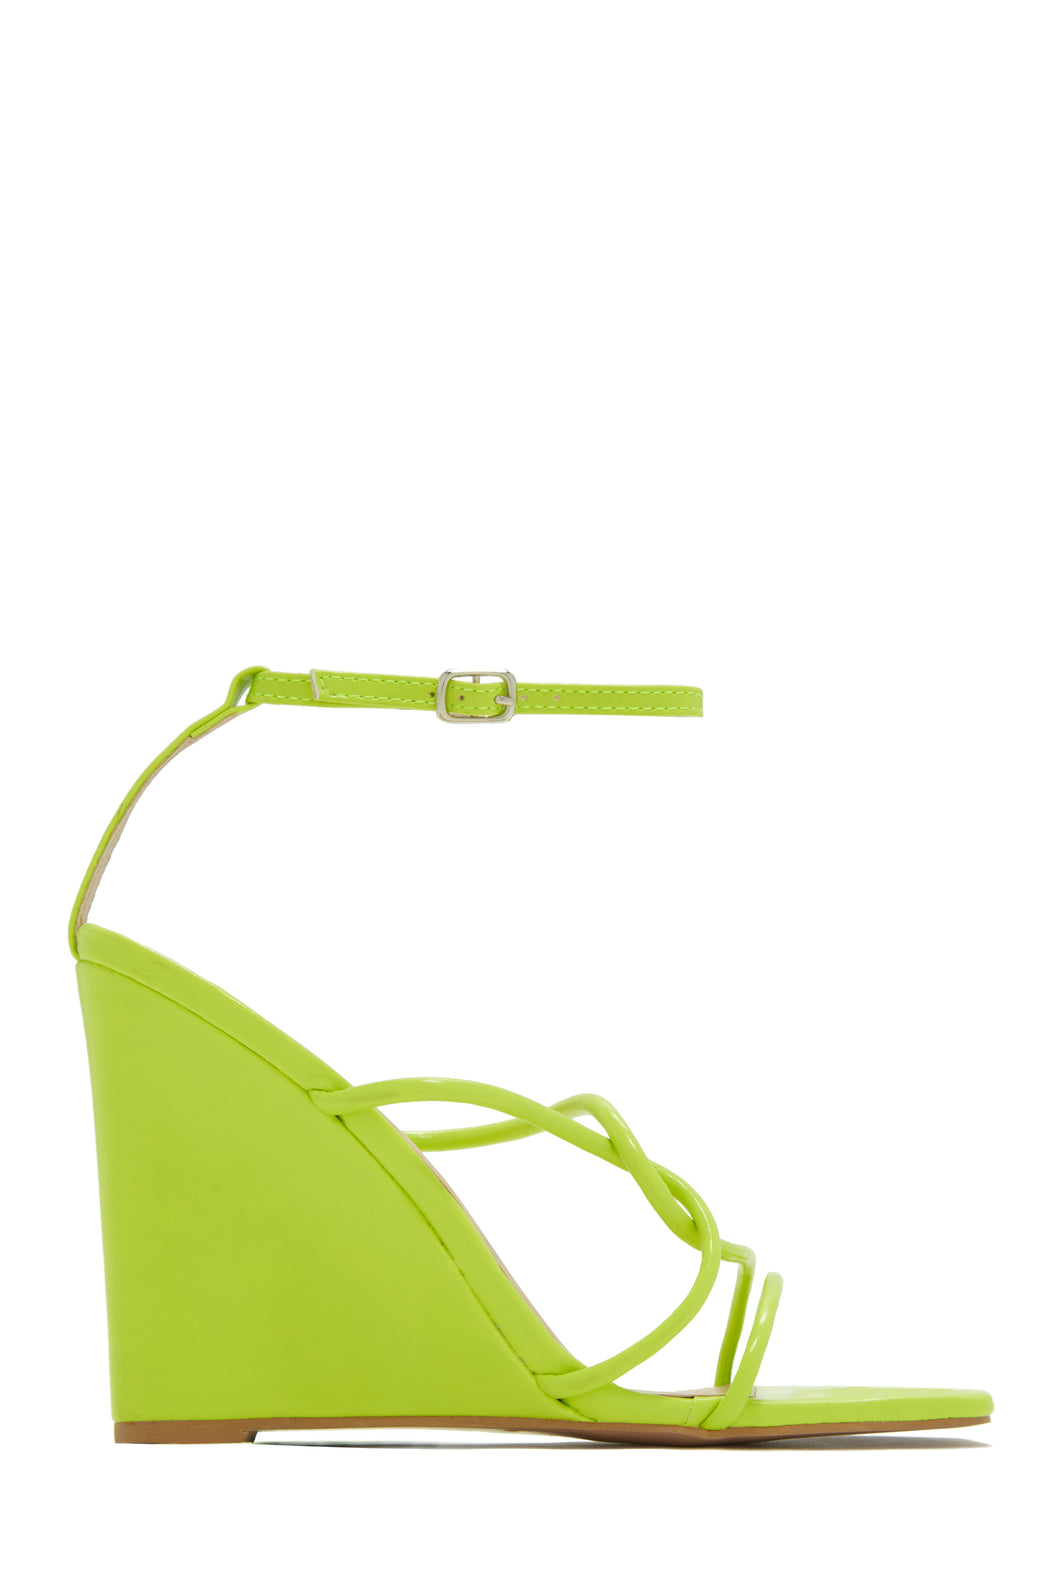 Green Ankle Strap Wedge Heel with Front Twist Detail